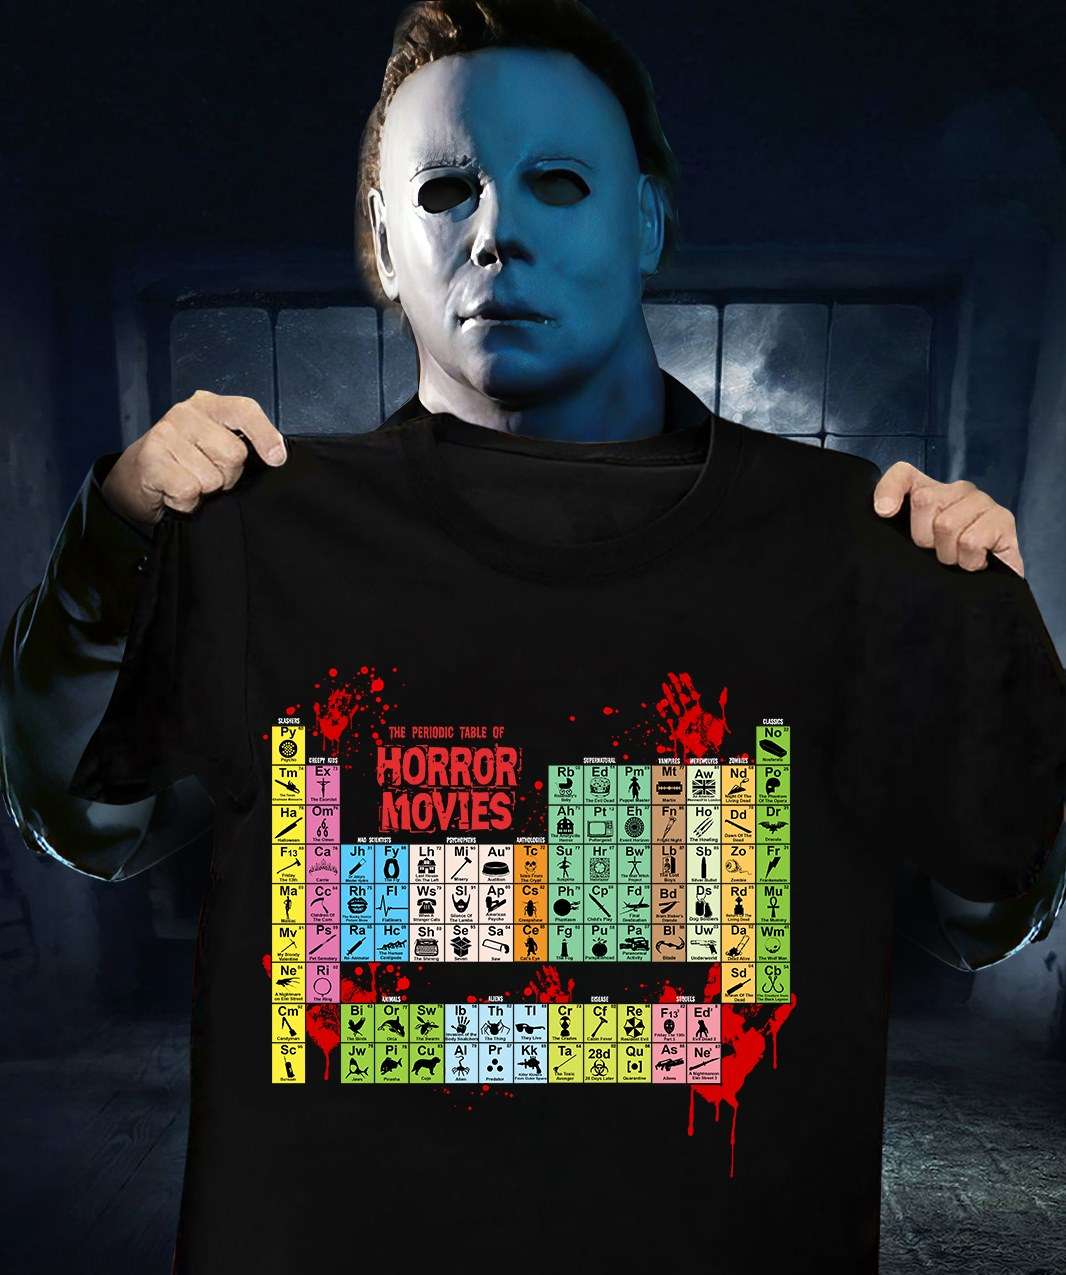 The periodic table of Horror movies - Horror movies for Halloween, Halloween gift